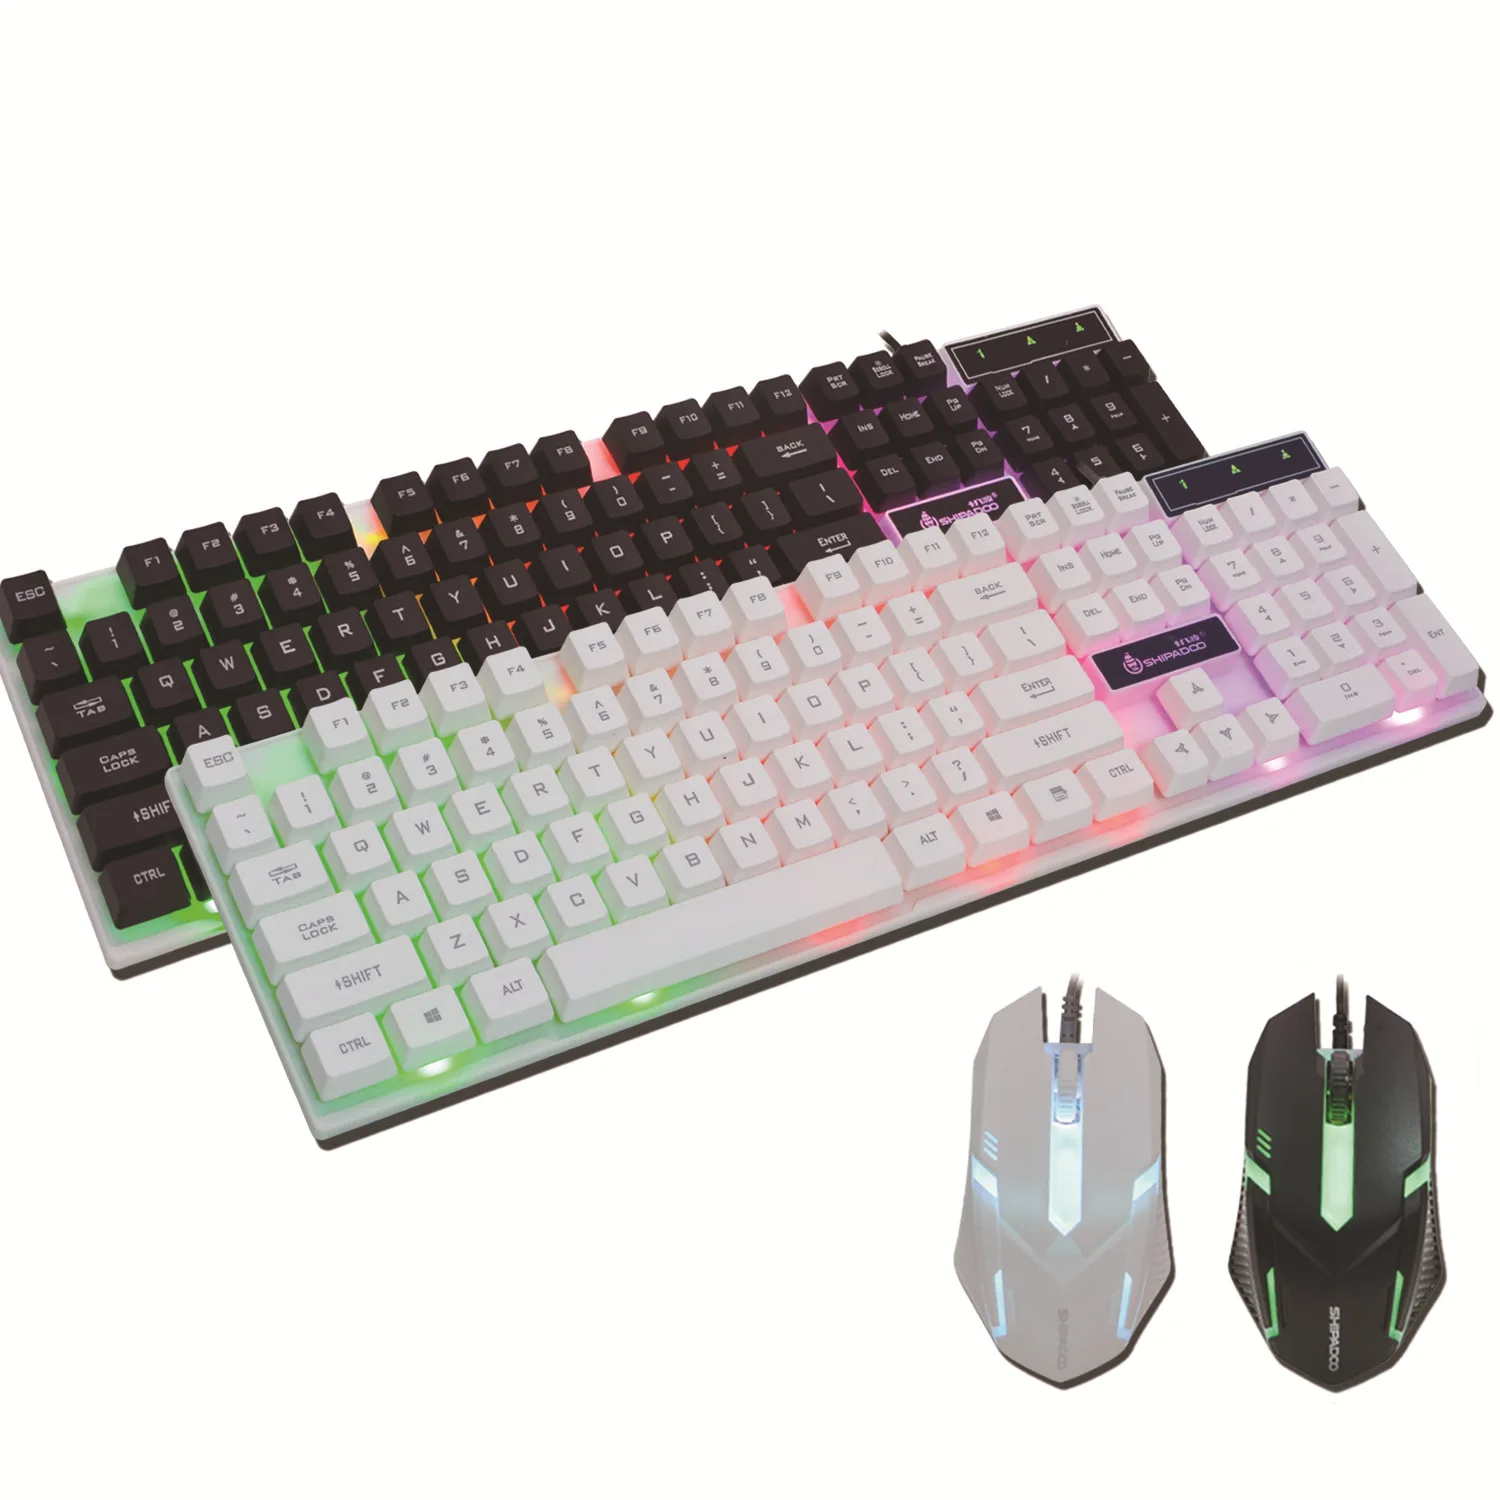 

RGB Backlight Wired Keyboard Mouse Combo Gaming Keyboard and Mouse Set with 104 Keys Keyboard Sensitive Breathing Mouse White